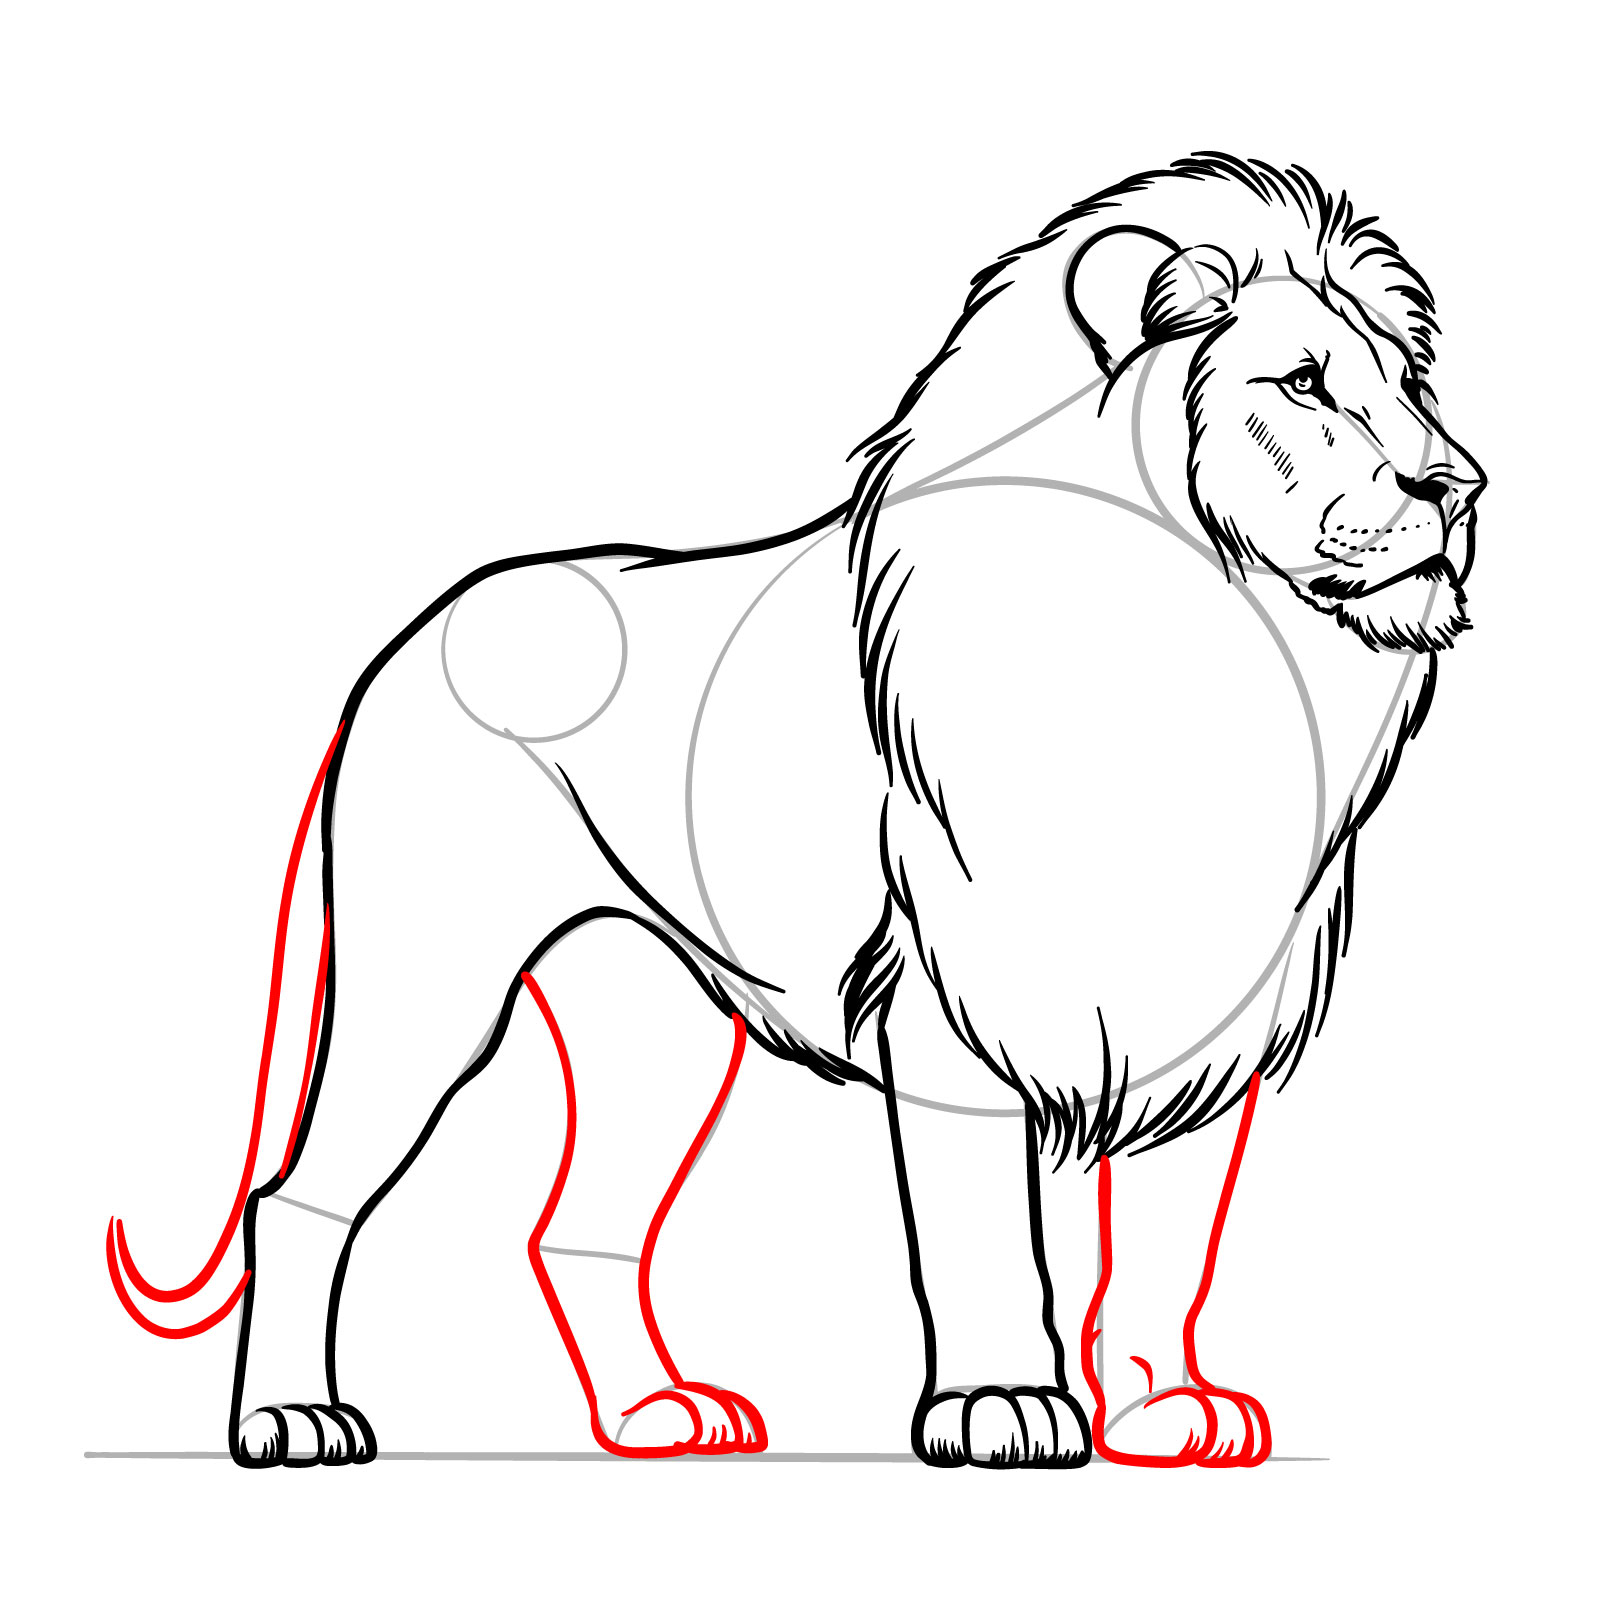 Adding the remaining legs and tail to a lion drawing - step 12